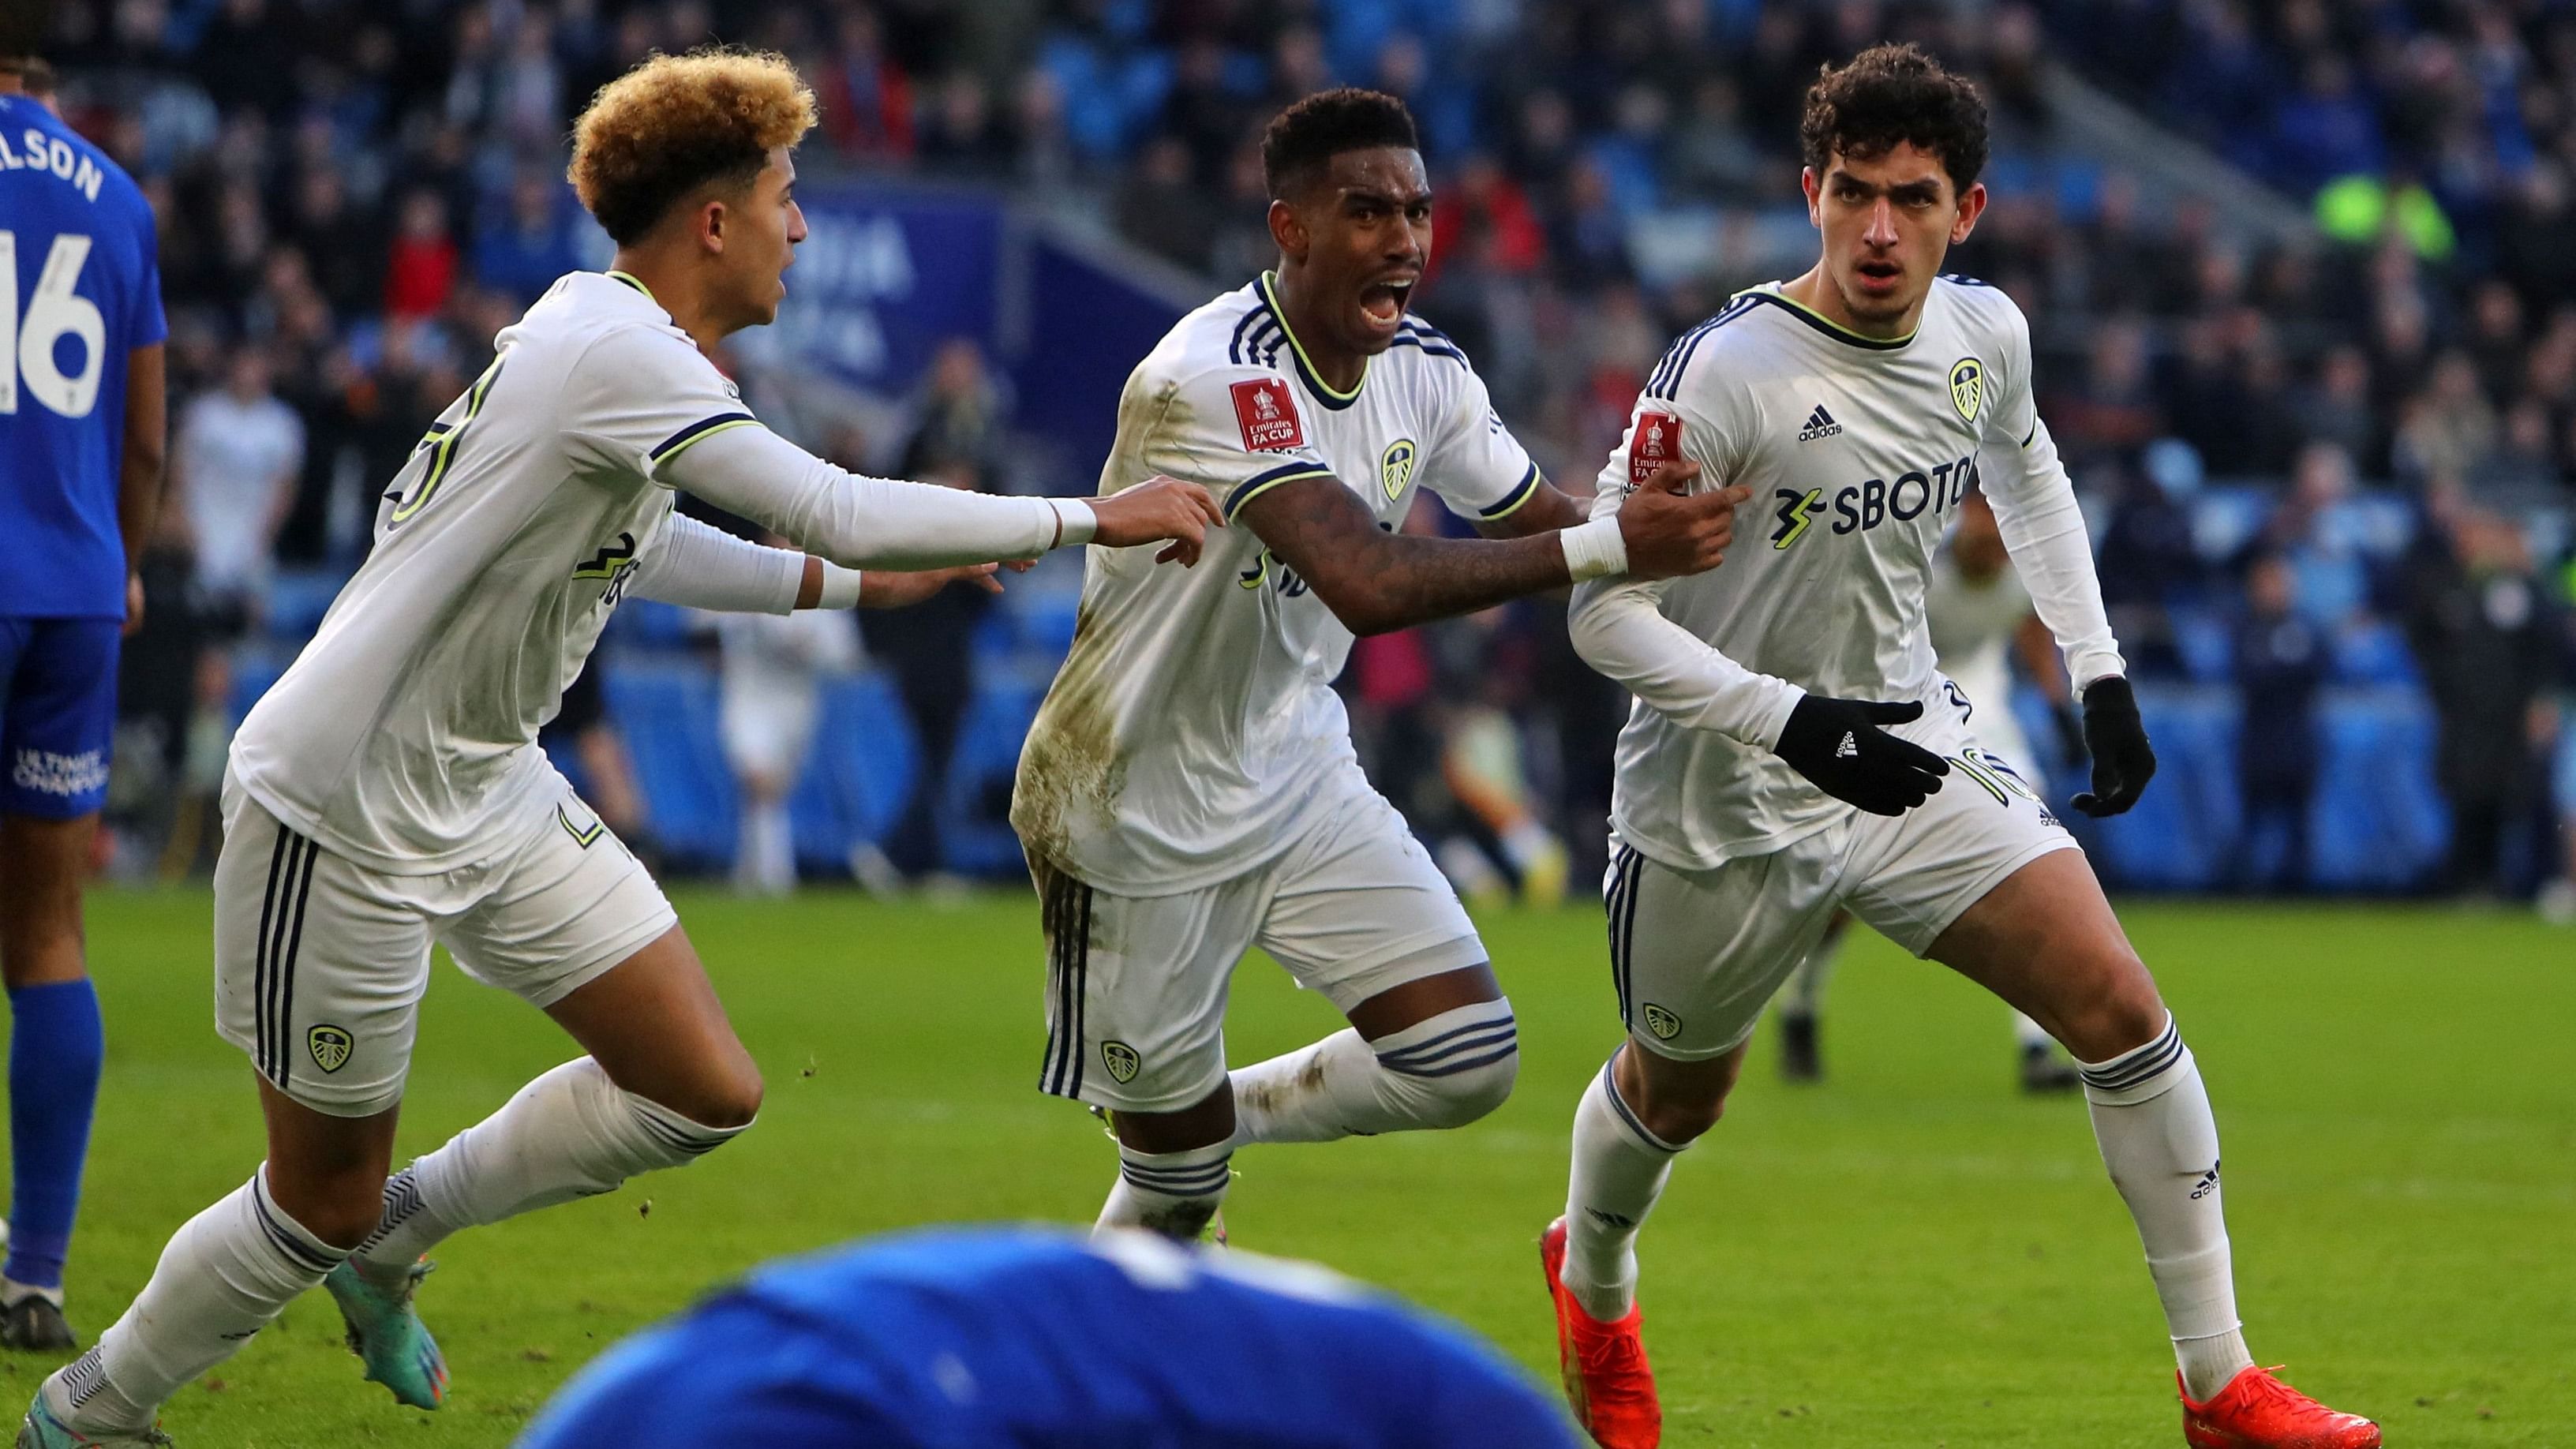 Leeds striker Sonny Perkins (R) celebrates with teammates after scoring their second goal during the FA Cup third round football match against Cardiff City. Credit: AFP Photo